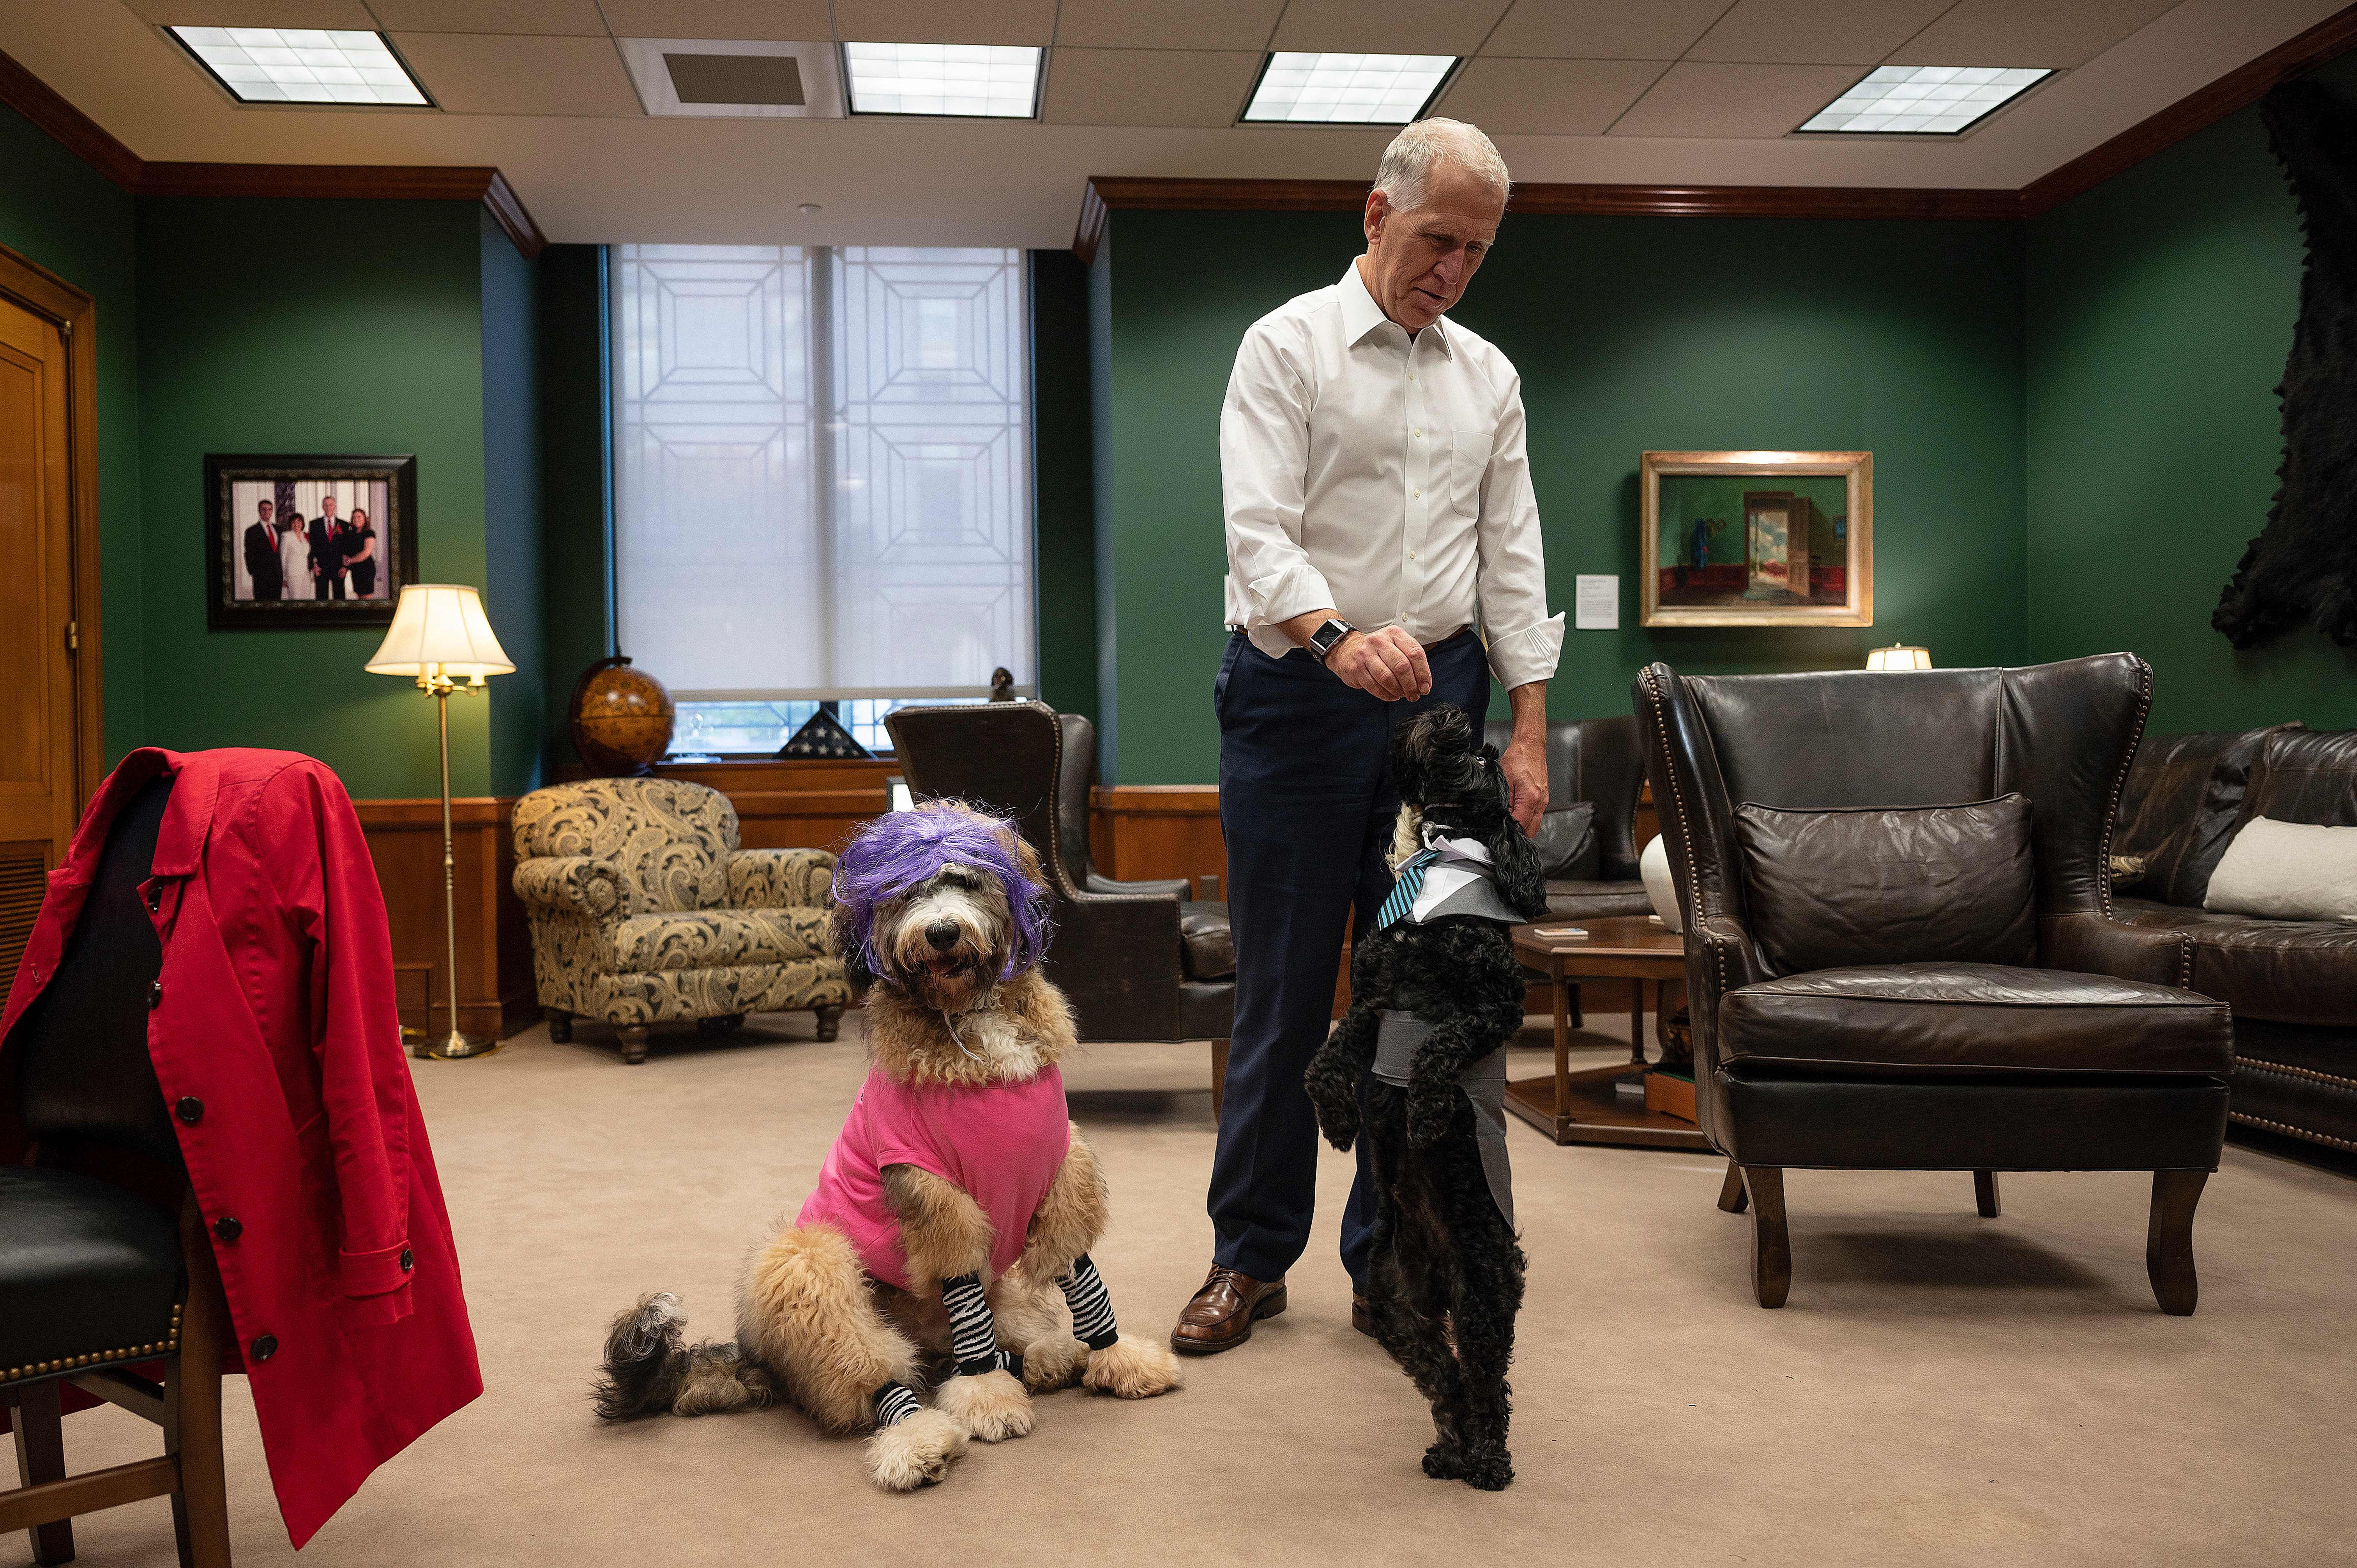 US Senator Thom Tillis, R-NC, feeds his dog Mitch, dressed as US Senator Mitch McConnell, a treat as his other dog Theo sits in his costume as US Senator Kyrsten Sinema in his office prior to the annual Congressional Dog Costume Parade on Capitol Hill in Washington, DC, on October 27, 2021. (Photo by Jim WATSON / AFP) (Photo by JIM WATSON/AFP via Getty Images)